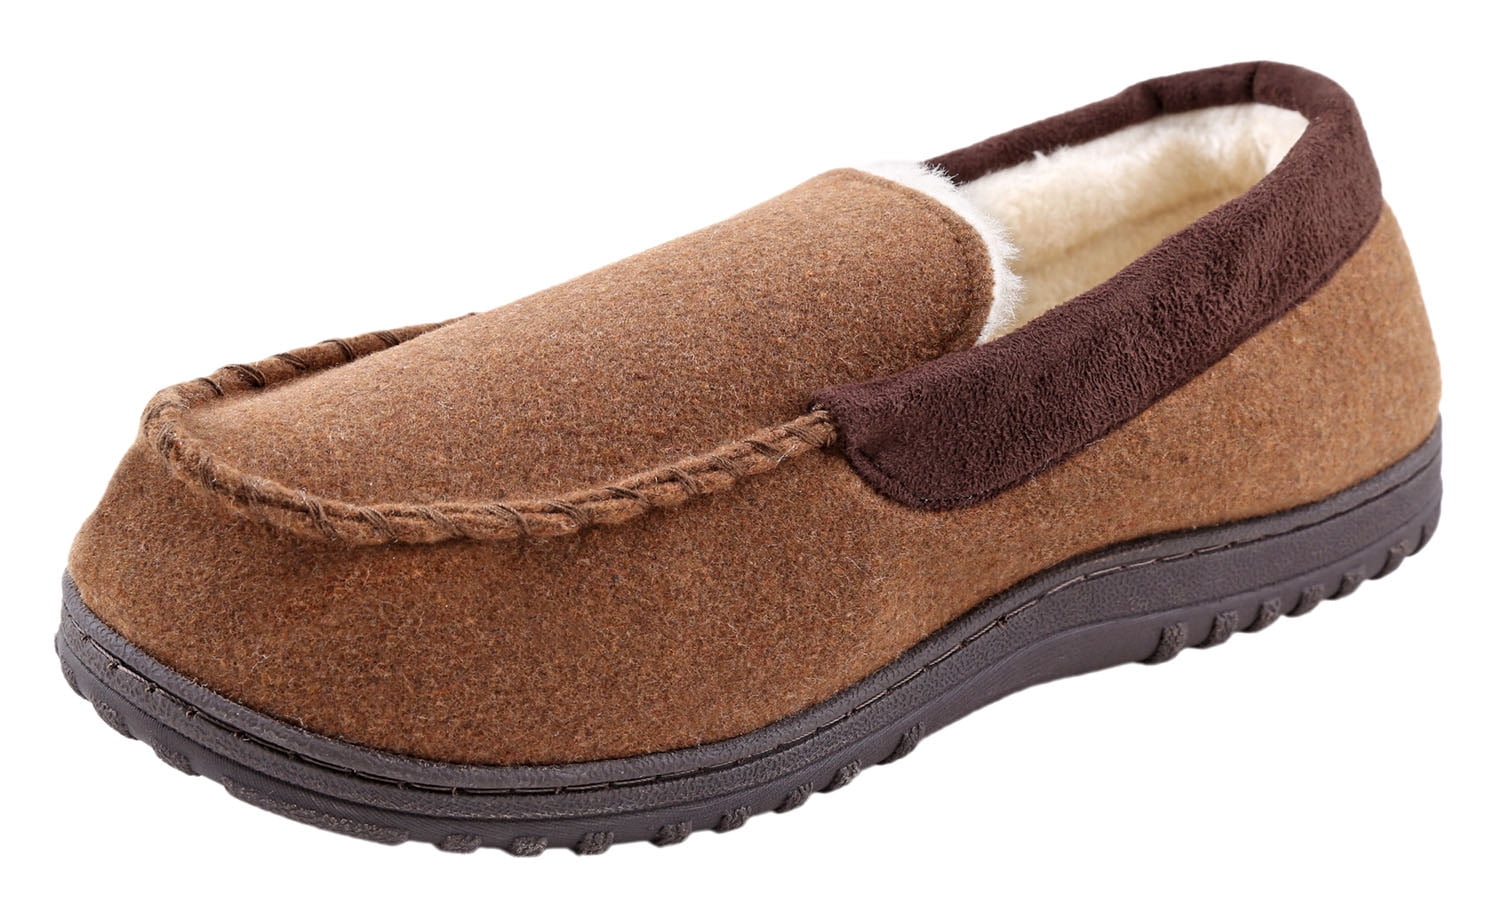 URBAN FOX - Camden Suede Slippers Mens | Comfortable House and Outdoor ...